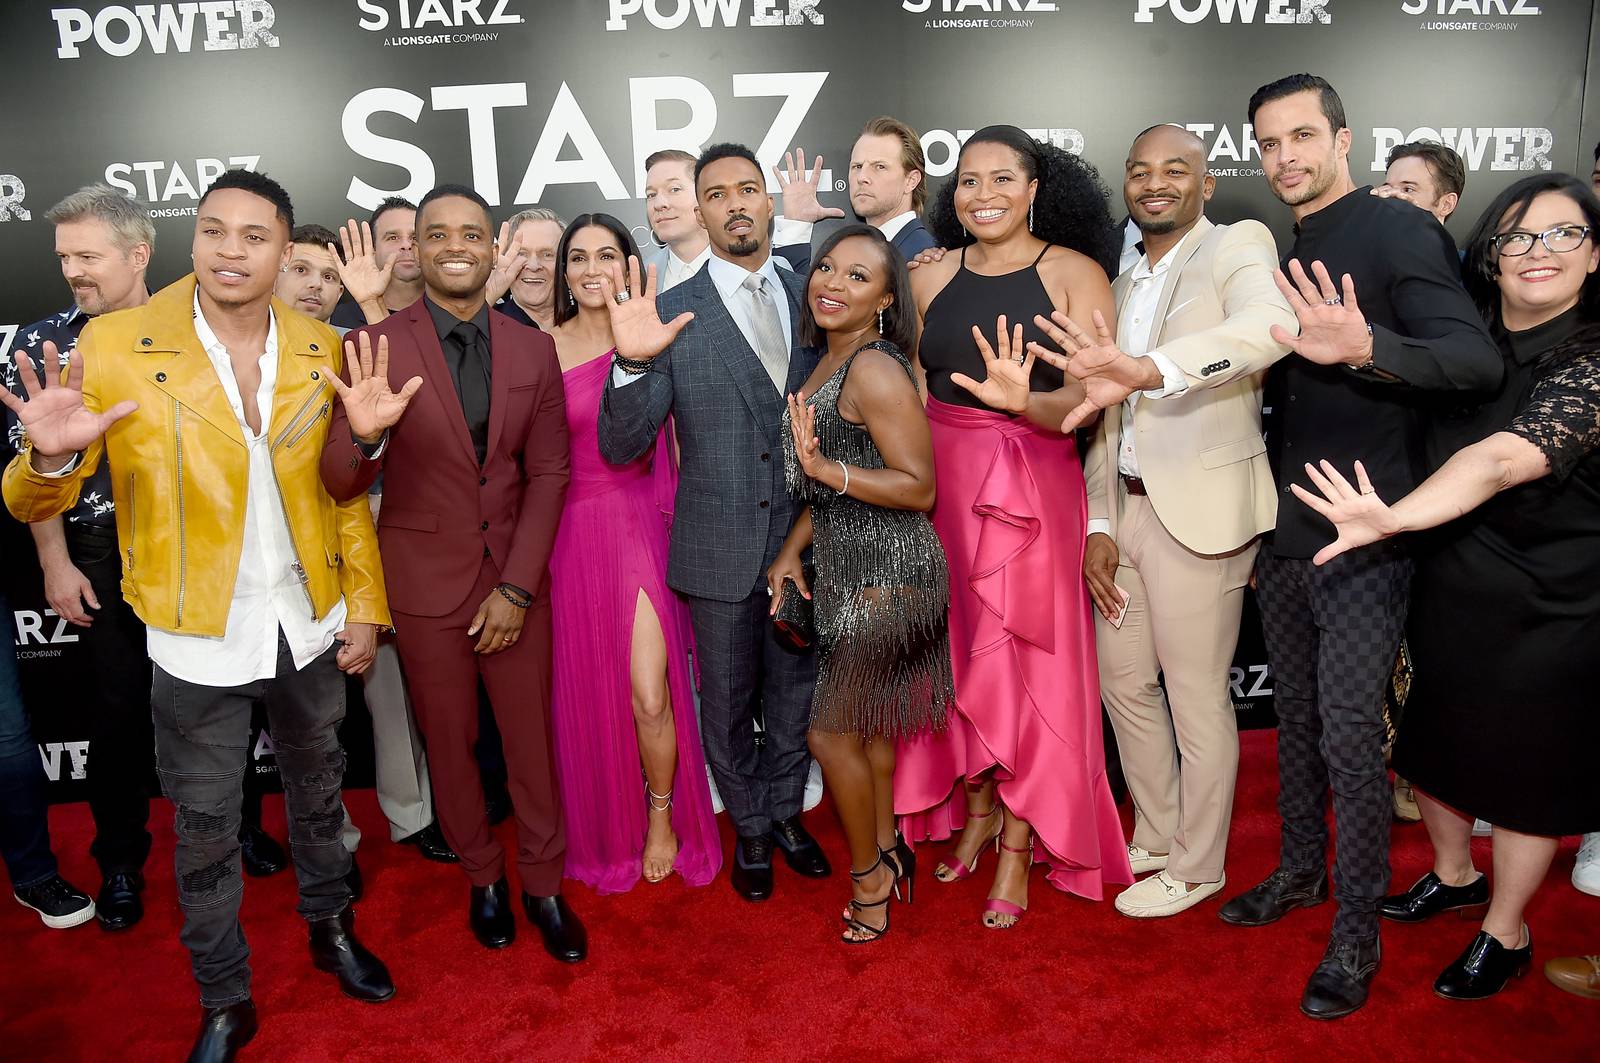 Starz series “Power” coming to an end KISS 104.1 FM